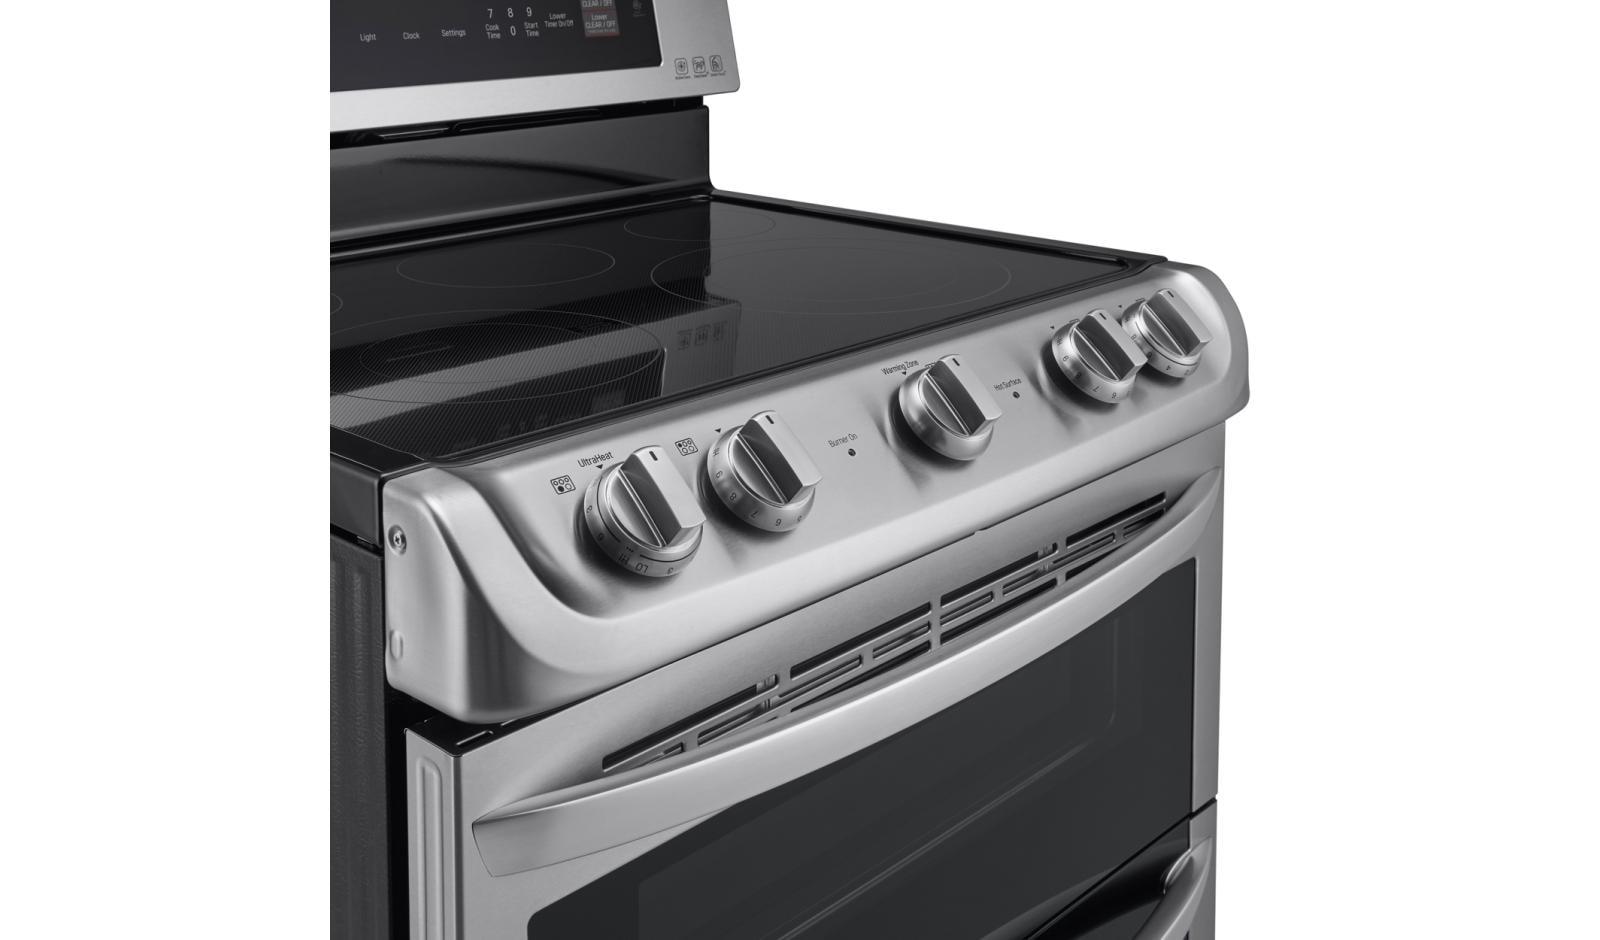 Lg 7.3 cu. ft. Electric Double Oven Range with ProBake Convection® and EasyClean®